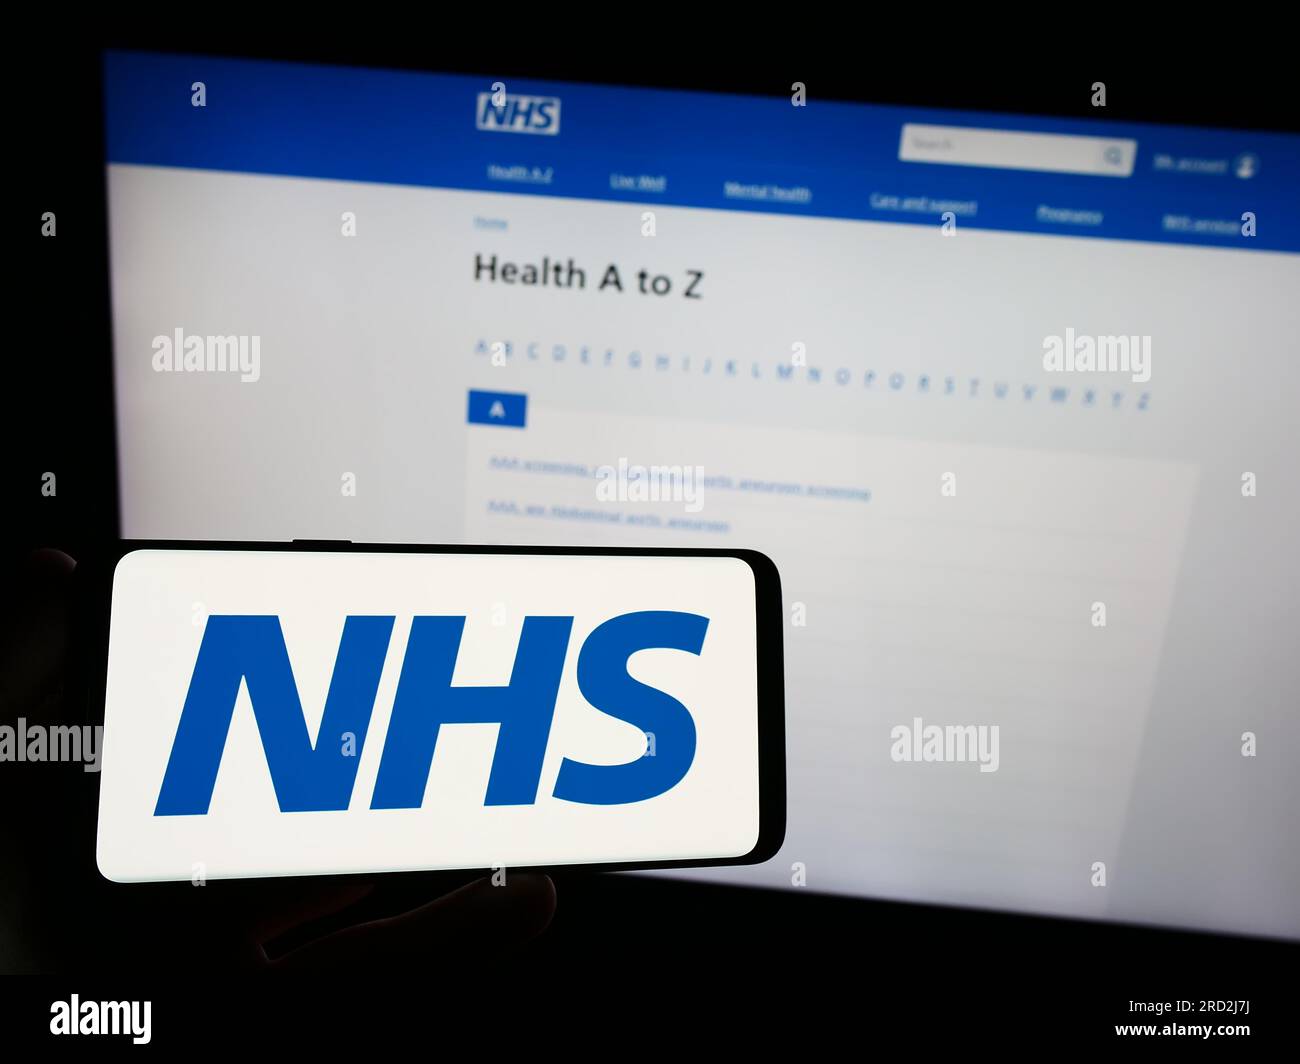 Person holding smartphone with logo of British National Health Service (NHS) on screen in front of website. Focus on phone display. Stock Photo